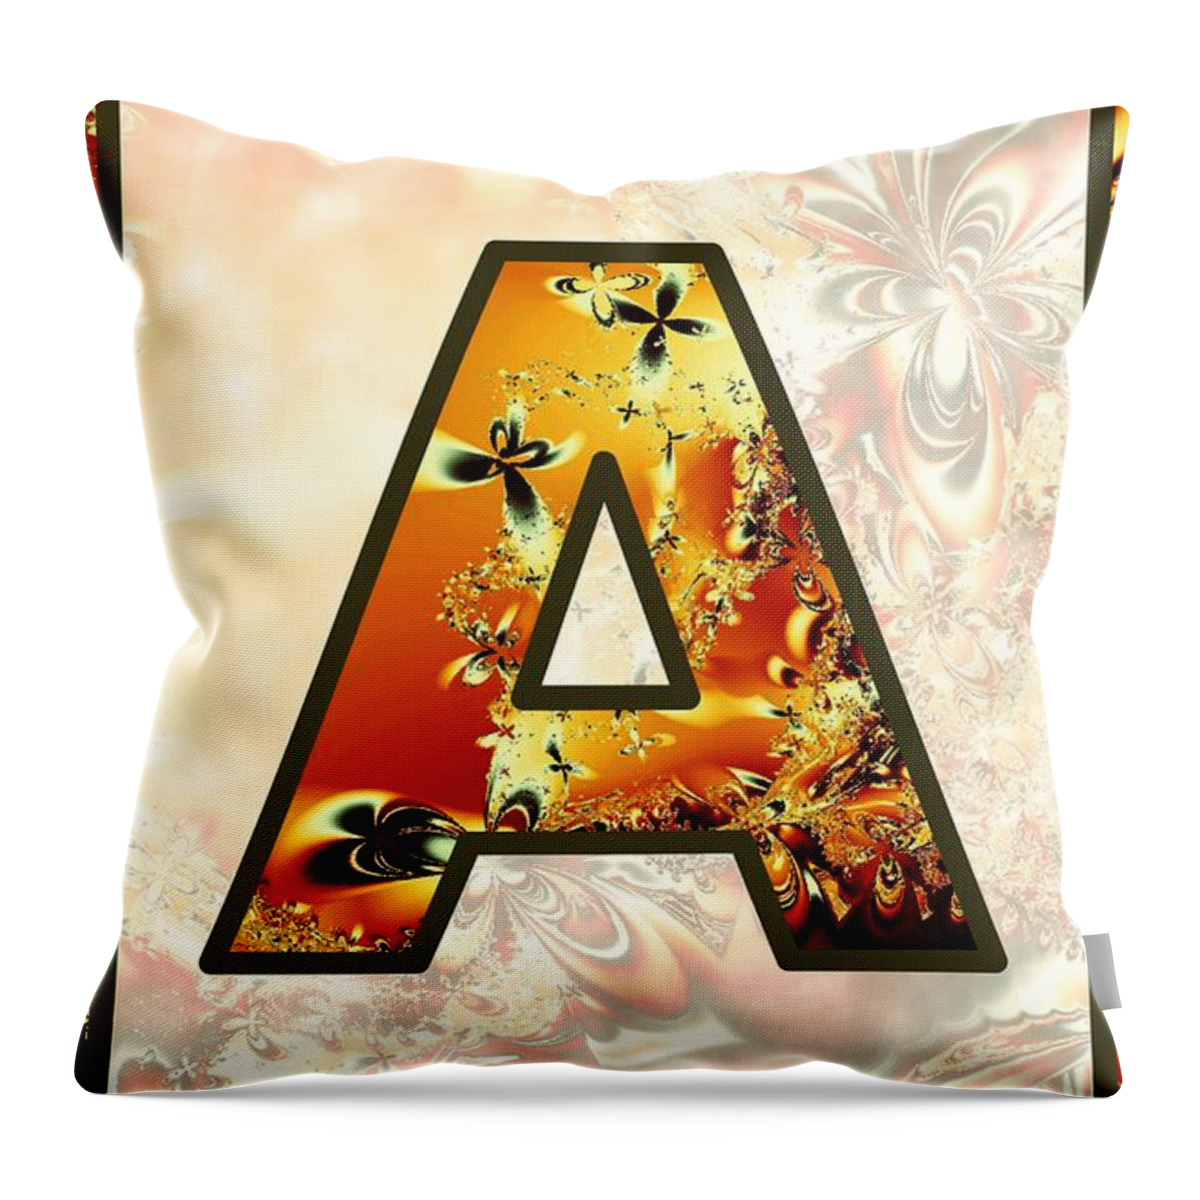 A Throw Pillow featuring the digital art Fractal - Alphabet - A is for Abstract by Anastasiya Malakhova